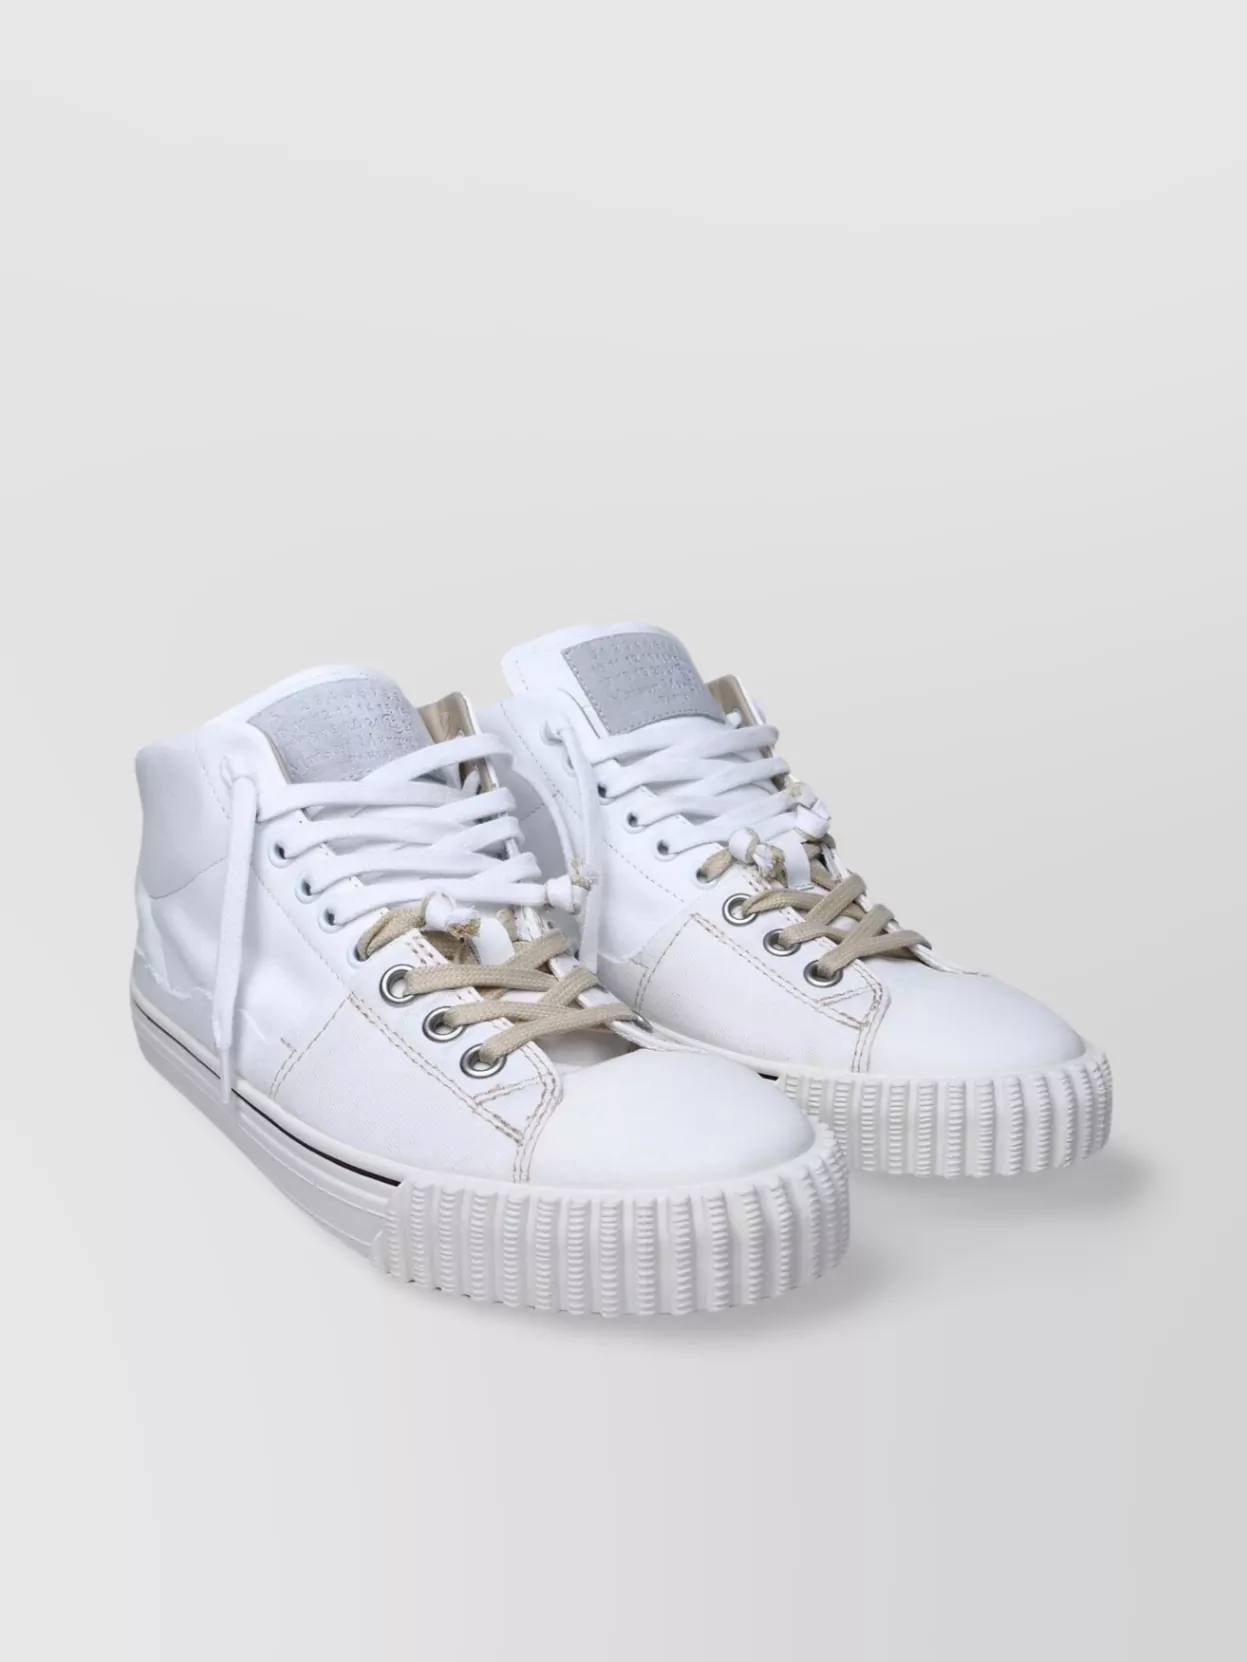 Maison Margiela Blend Leather High-top Sneakers